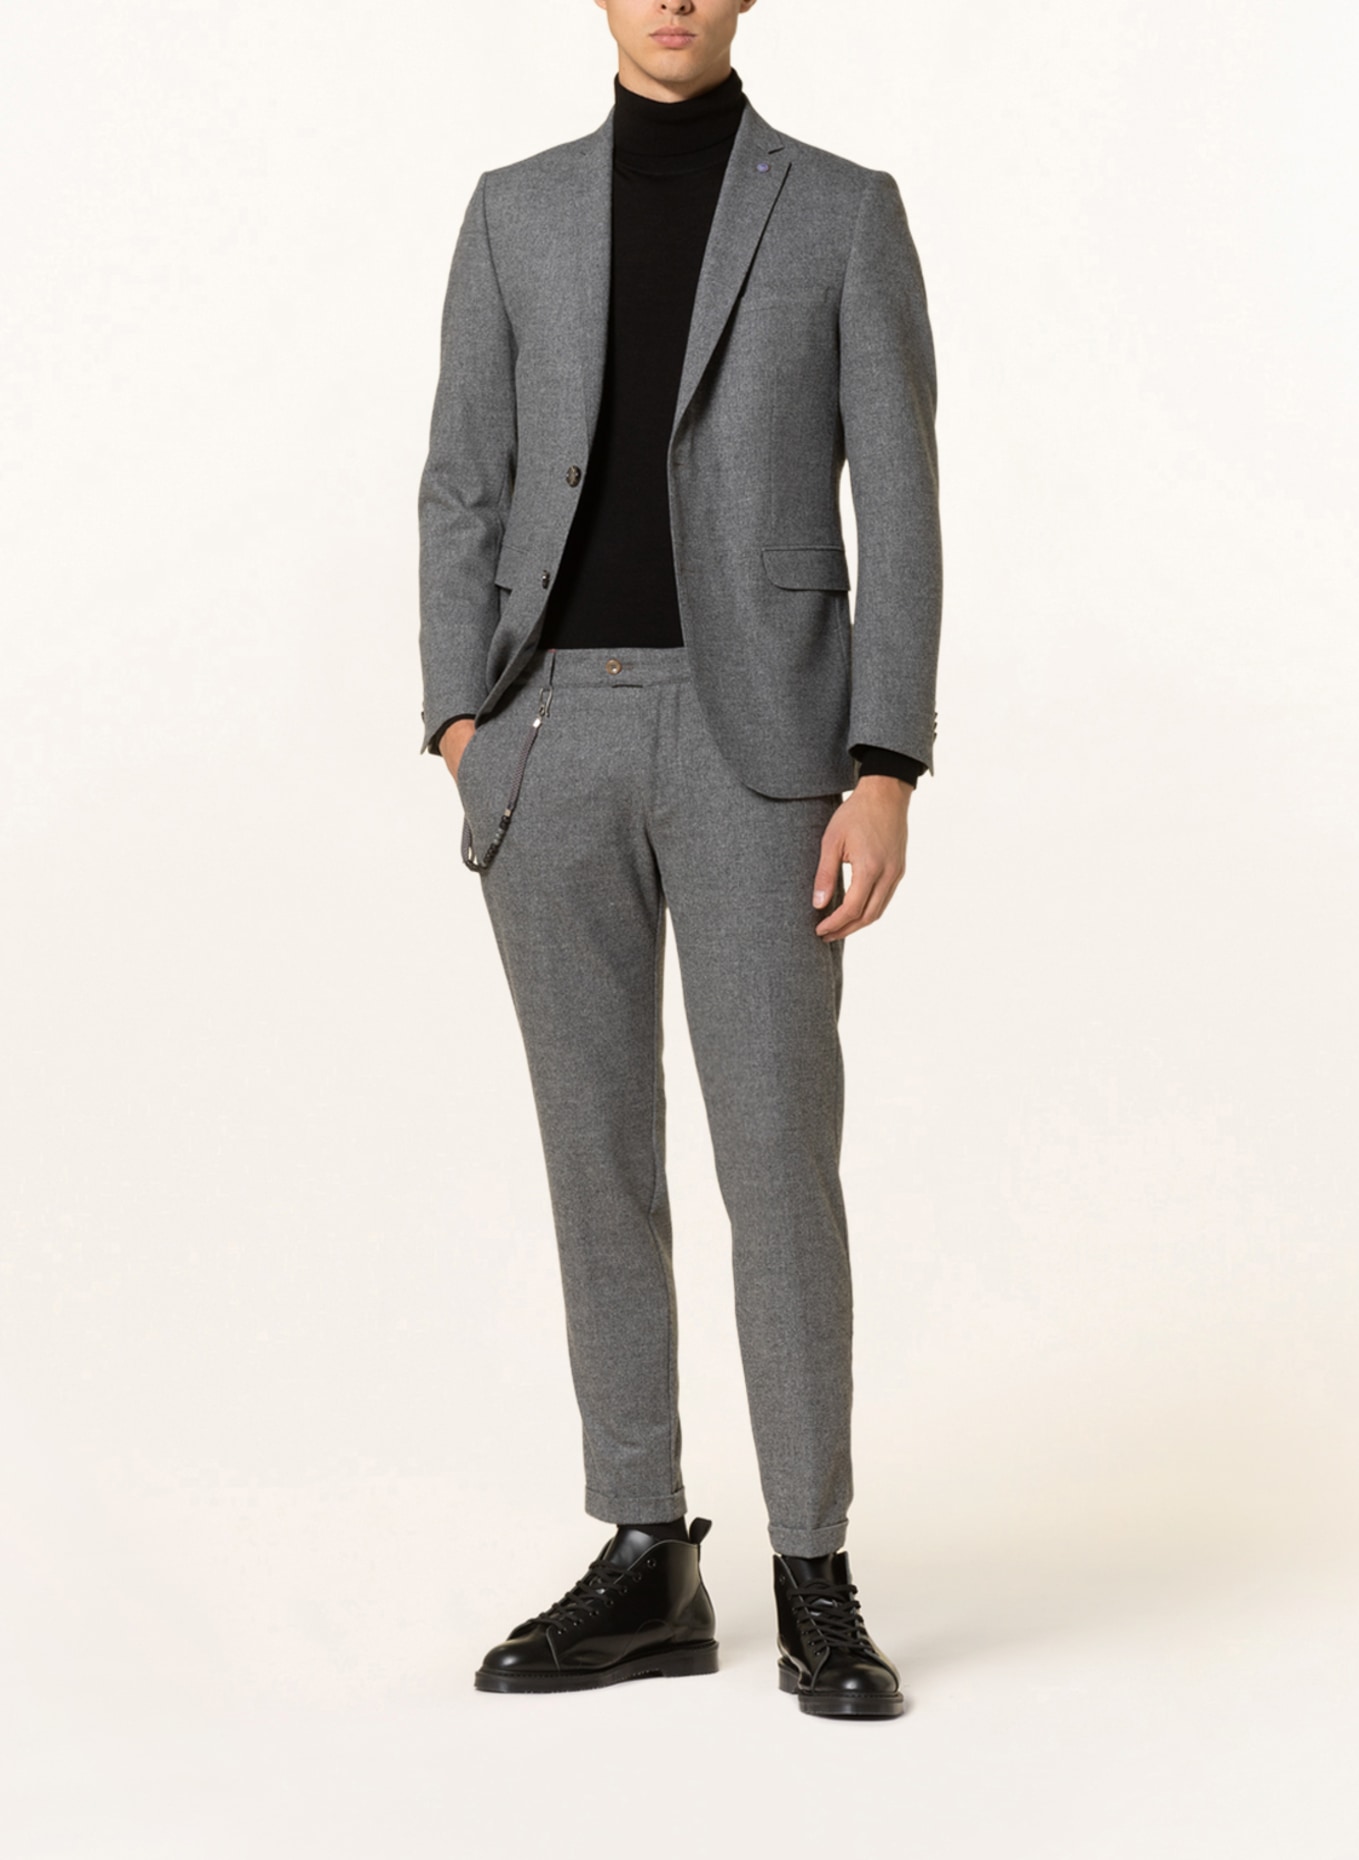 CG - CLUB of GENTS Suit trousers CG CAMERON extra slim fit, Color: 83 GRAU DUNKEL (Image 2)